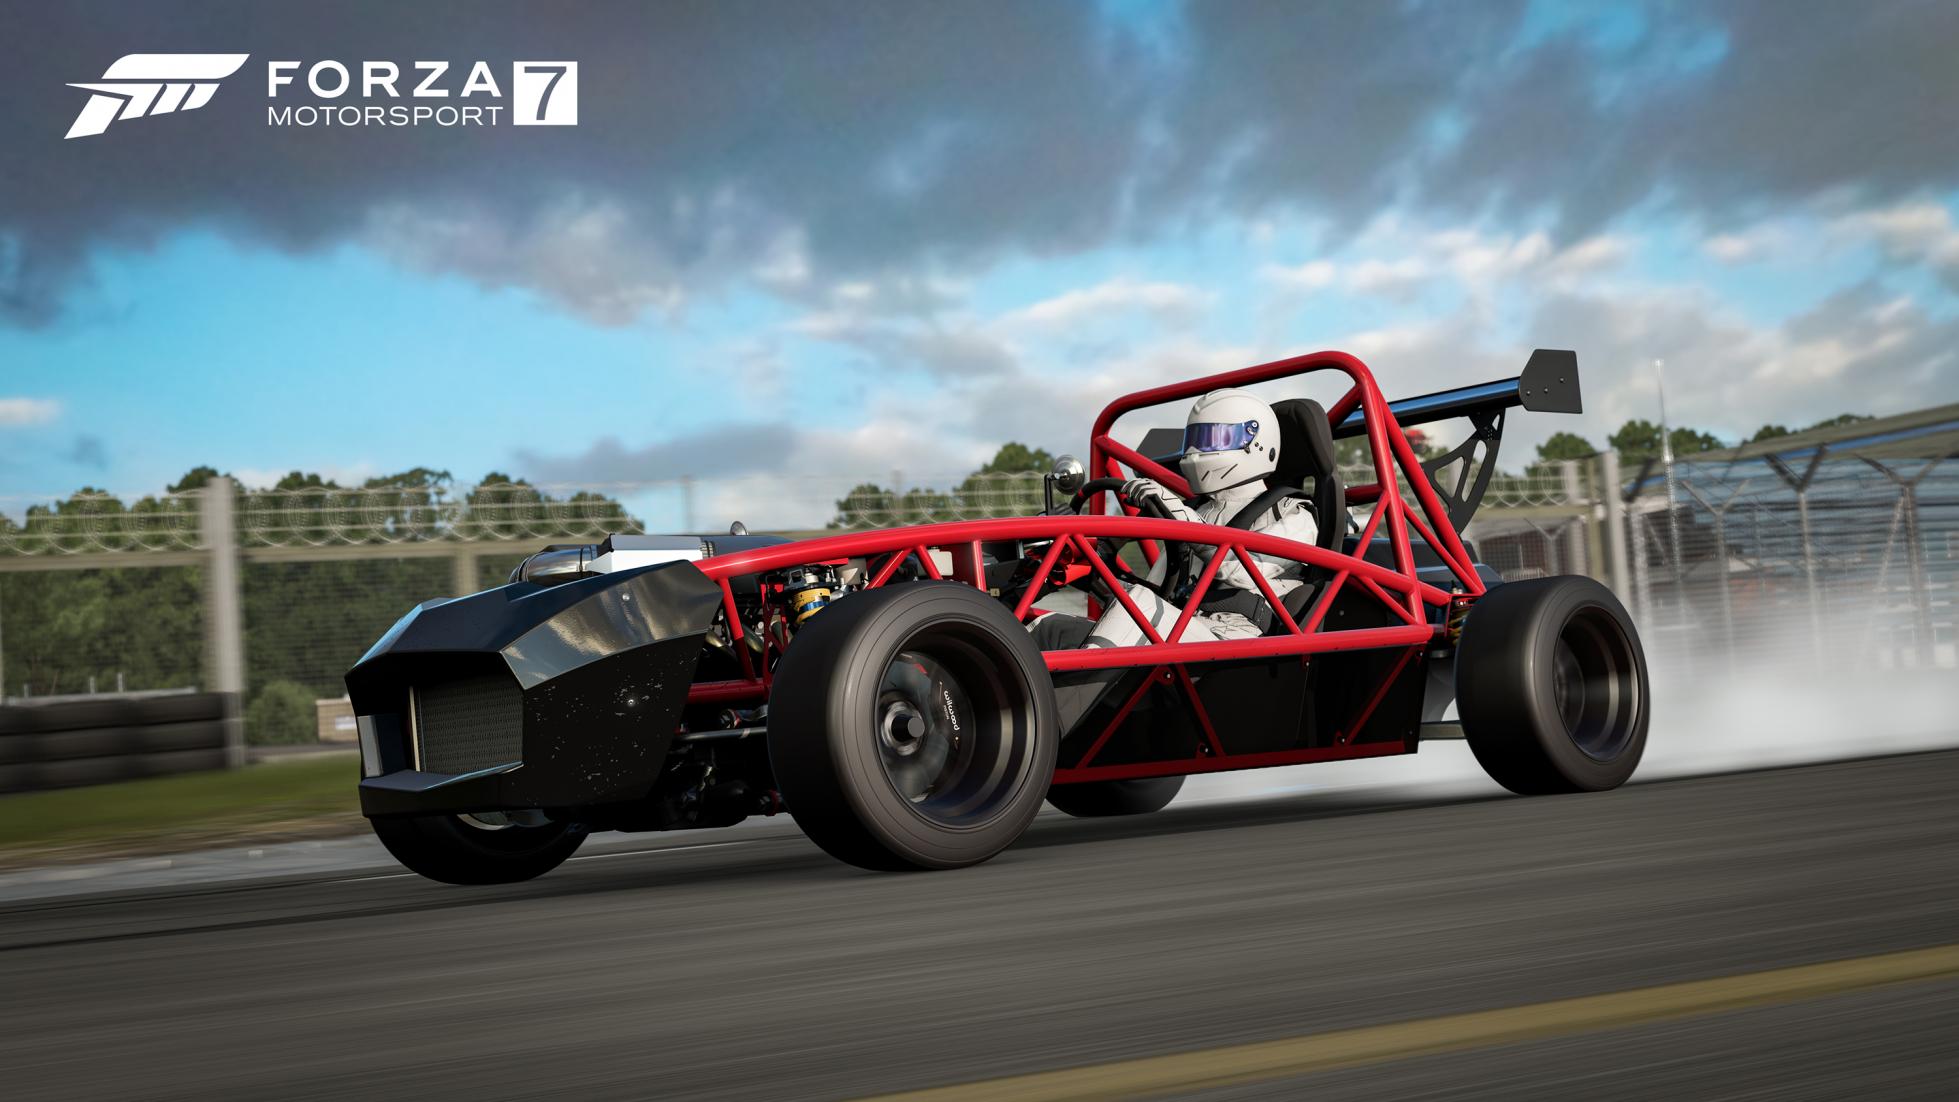 Exomotive Exocet Launches in Forza Motorsport 7